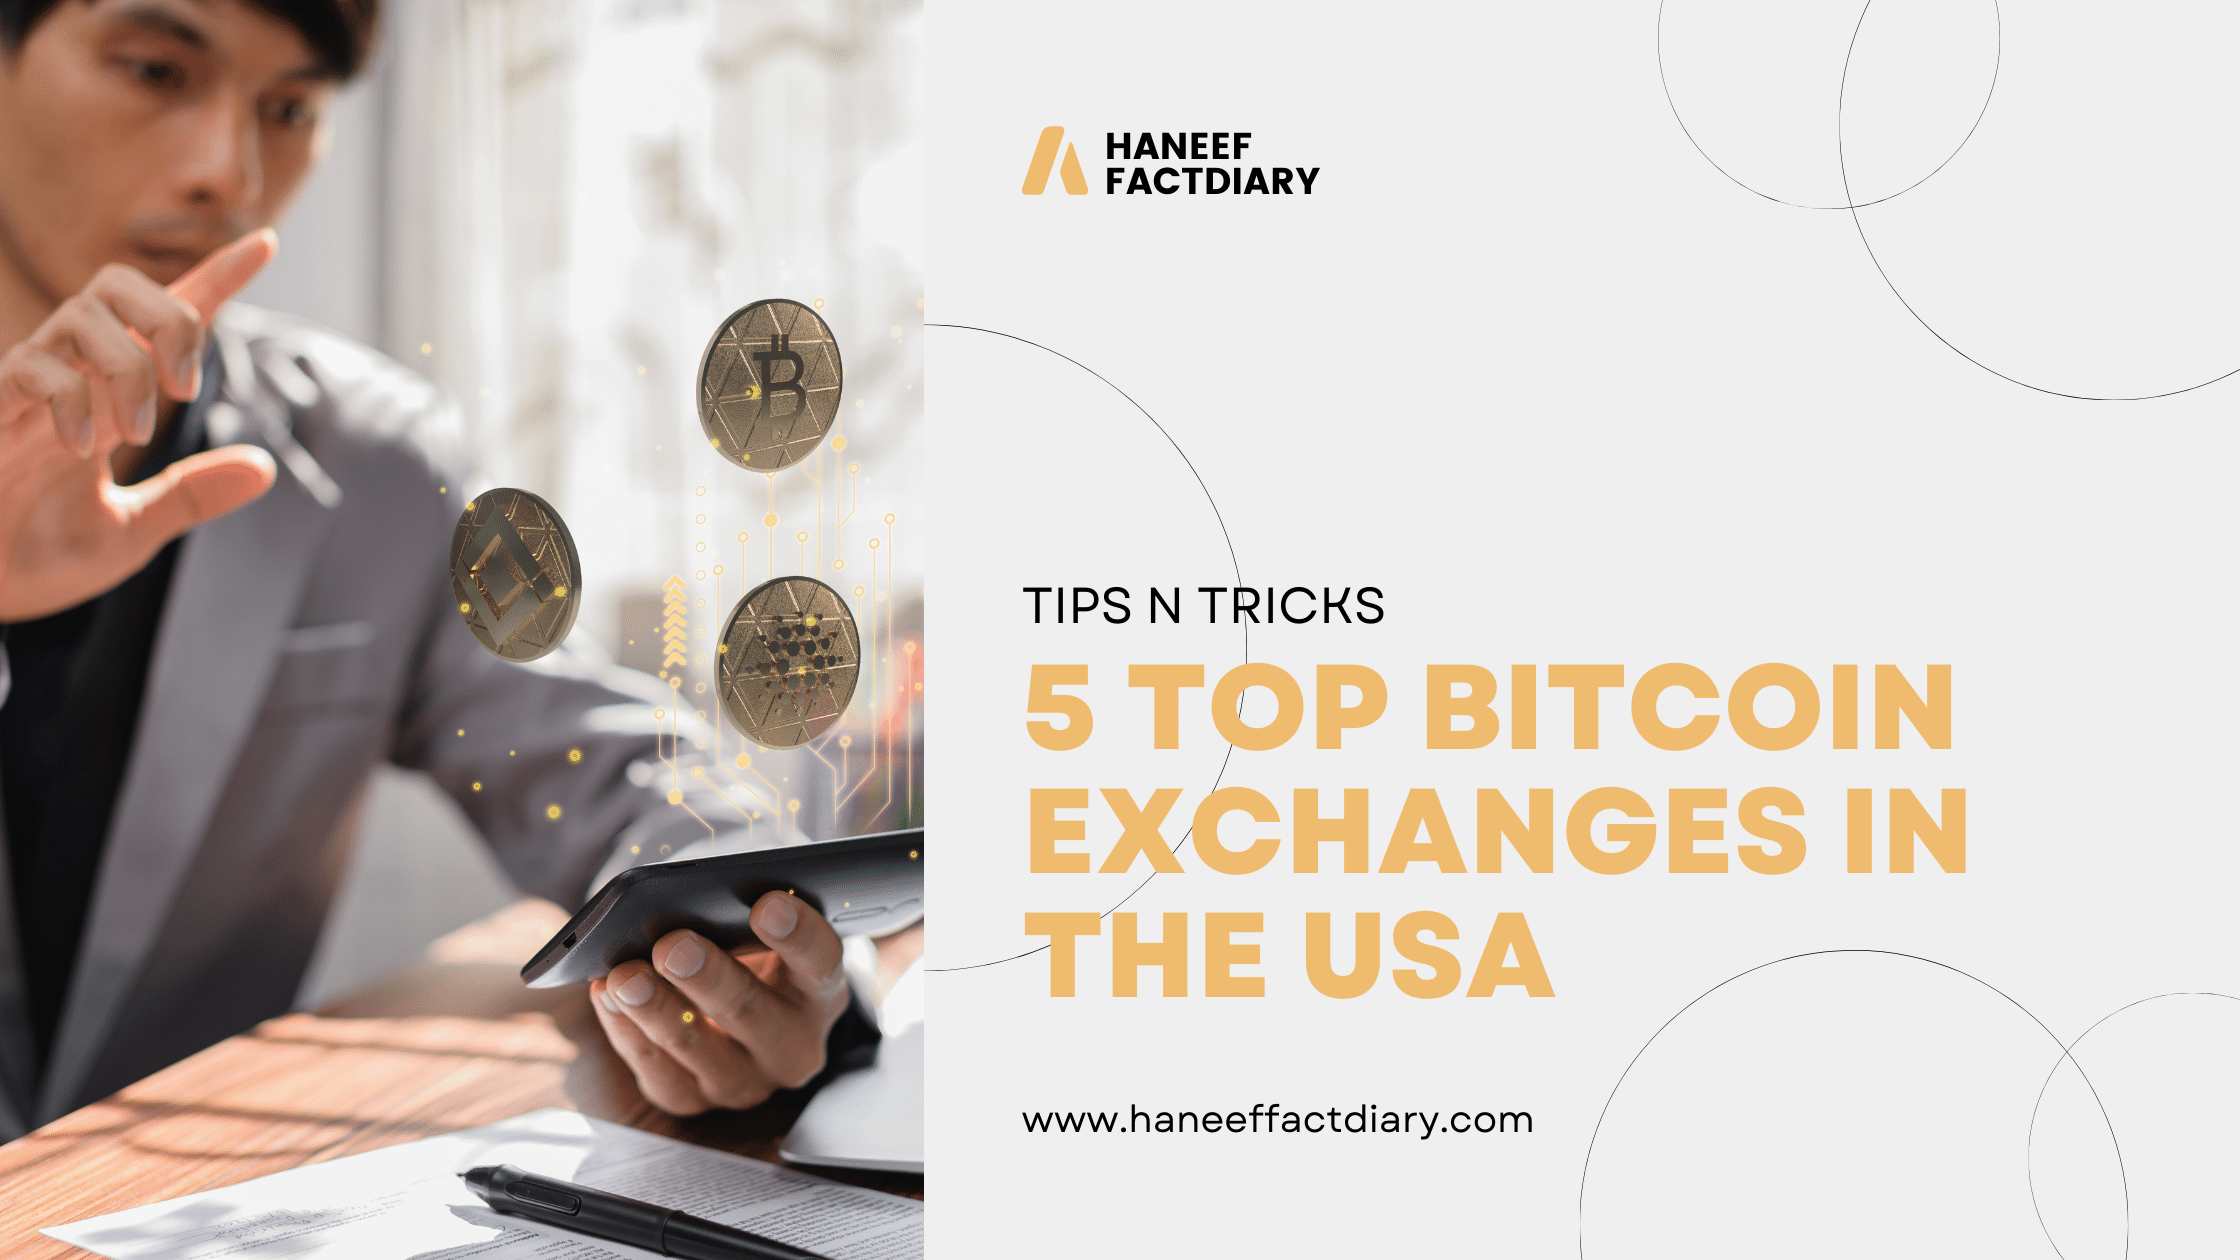 5 Top Bitcoin Exchanges In the USA